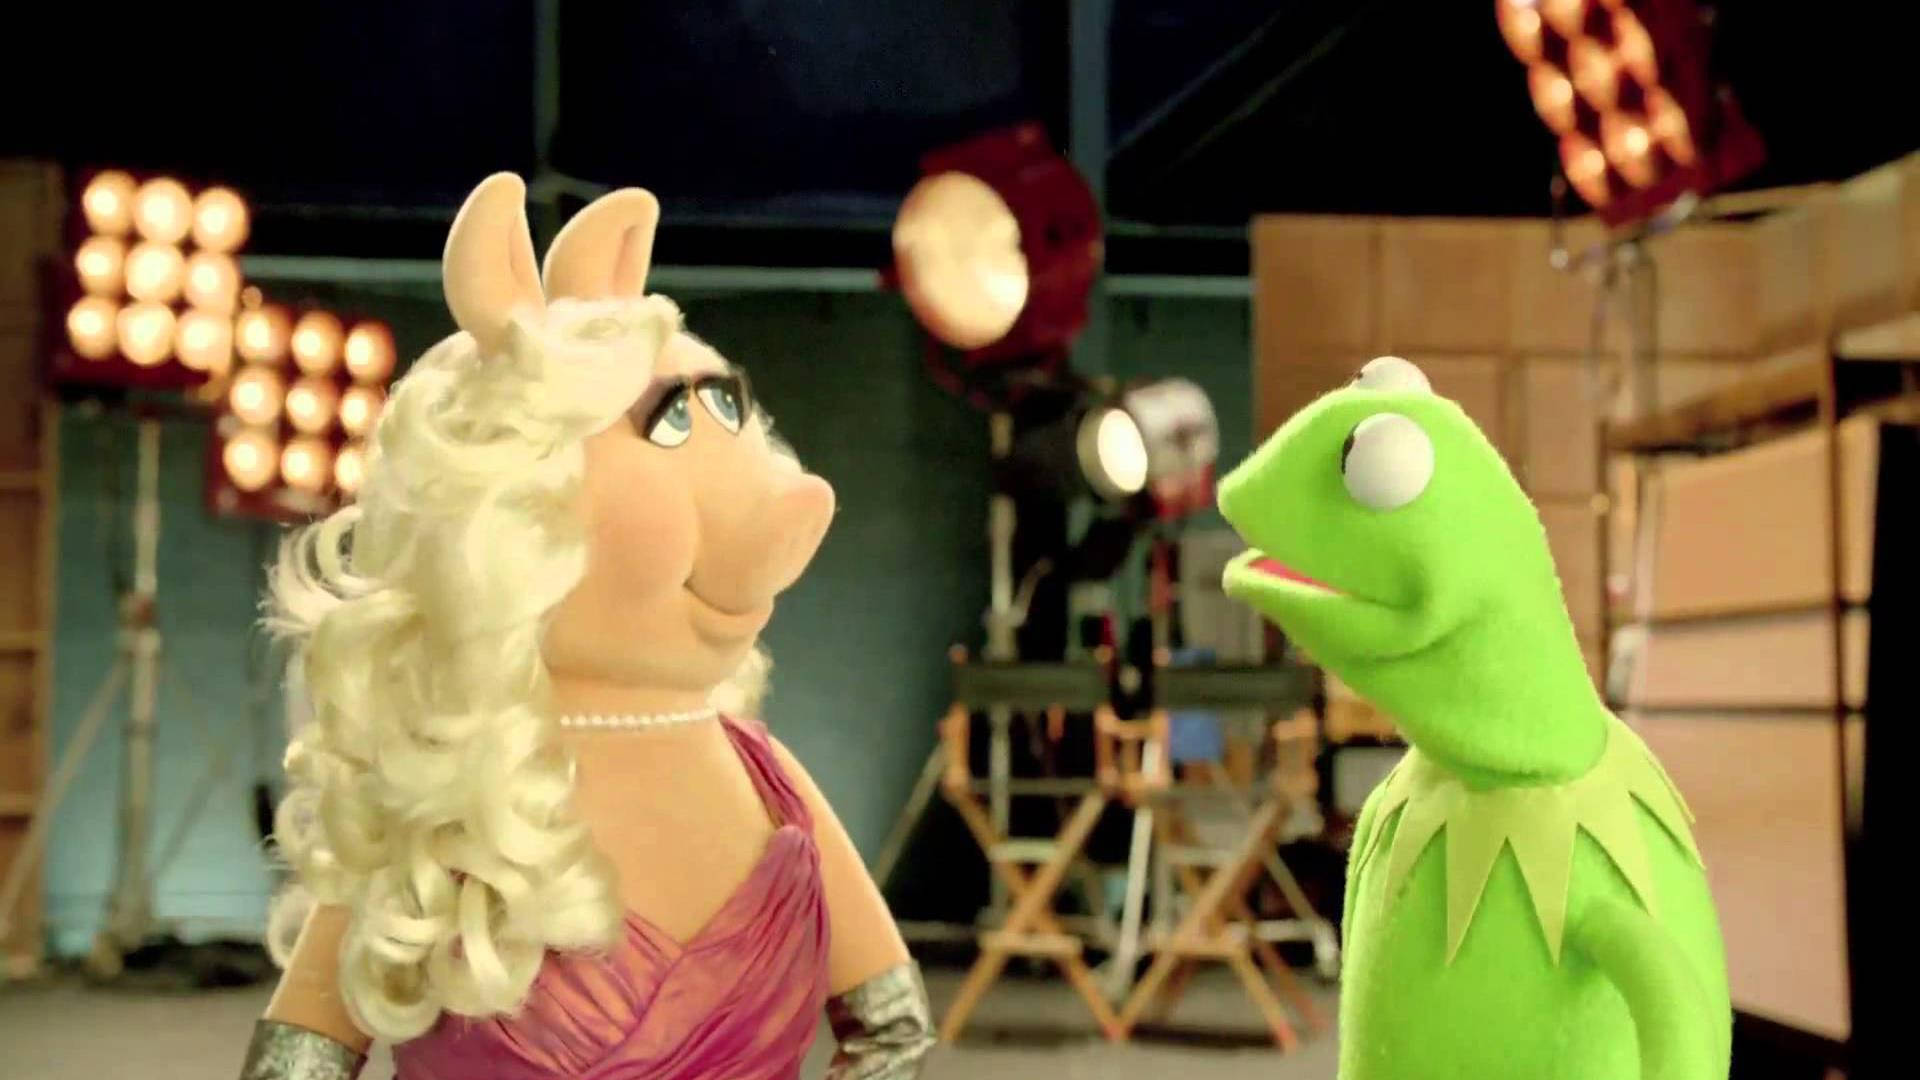 Download Miss Piggy And Kermit The Frog Wallpaper